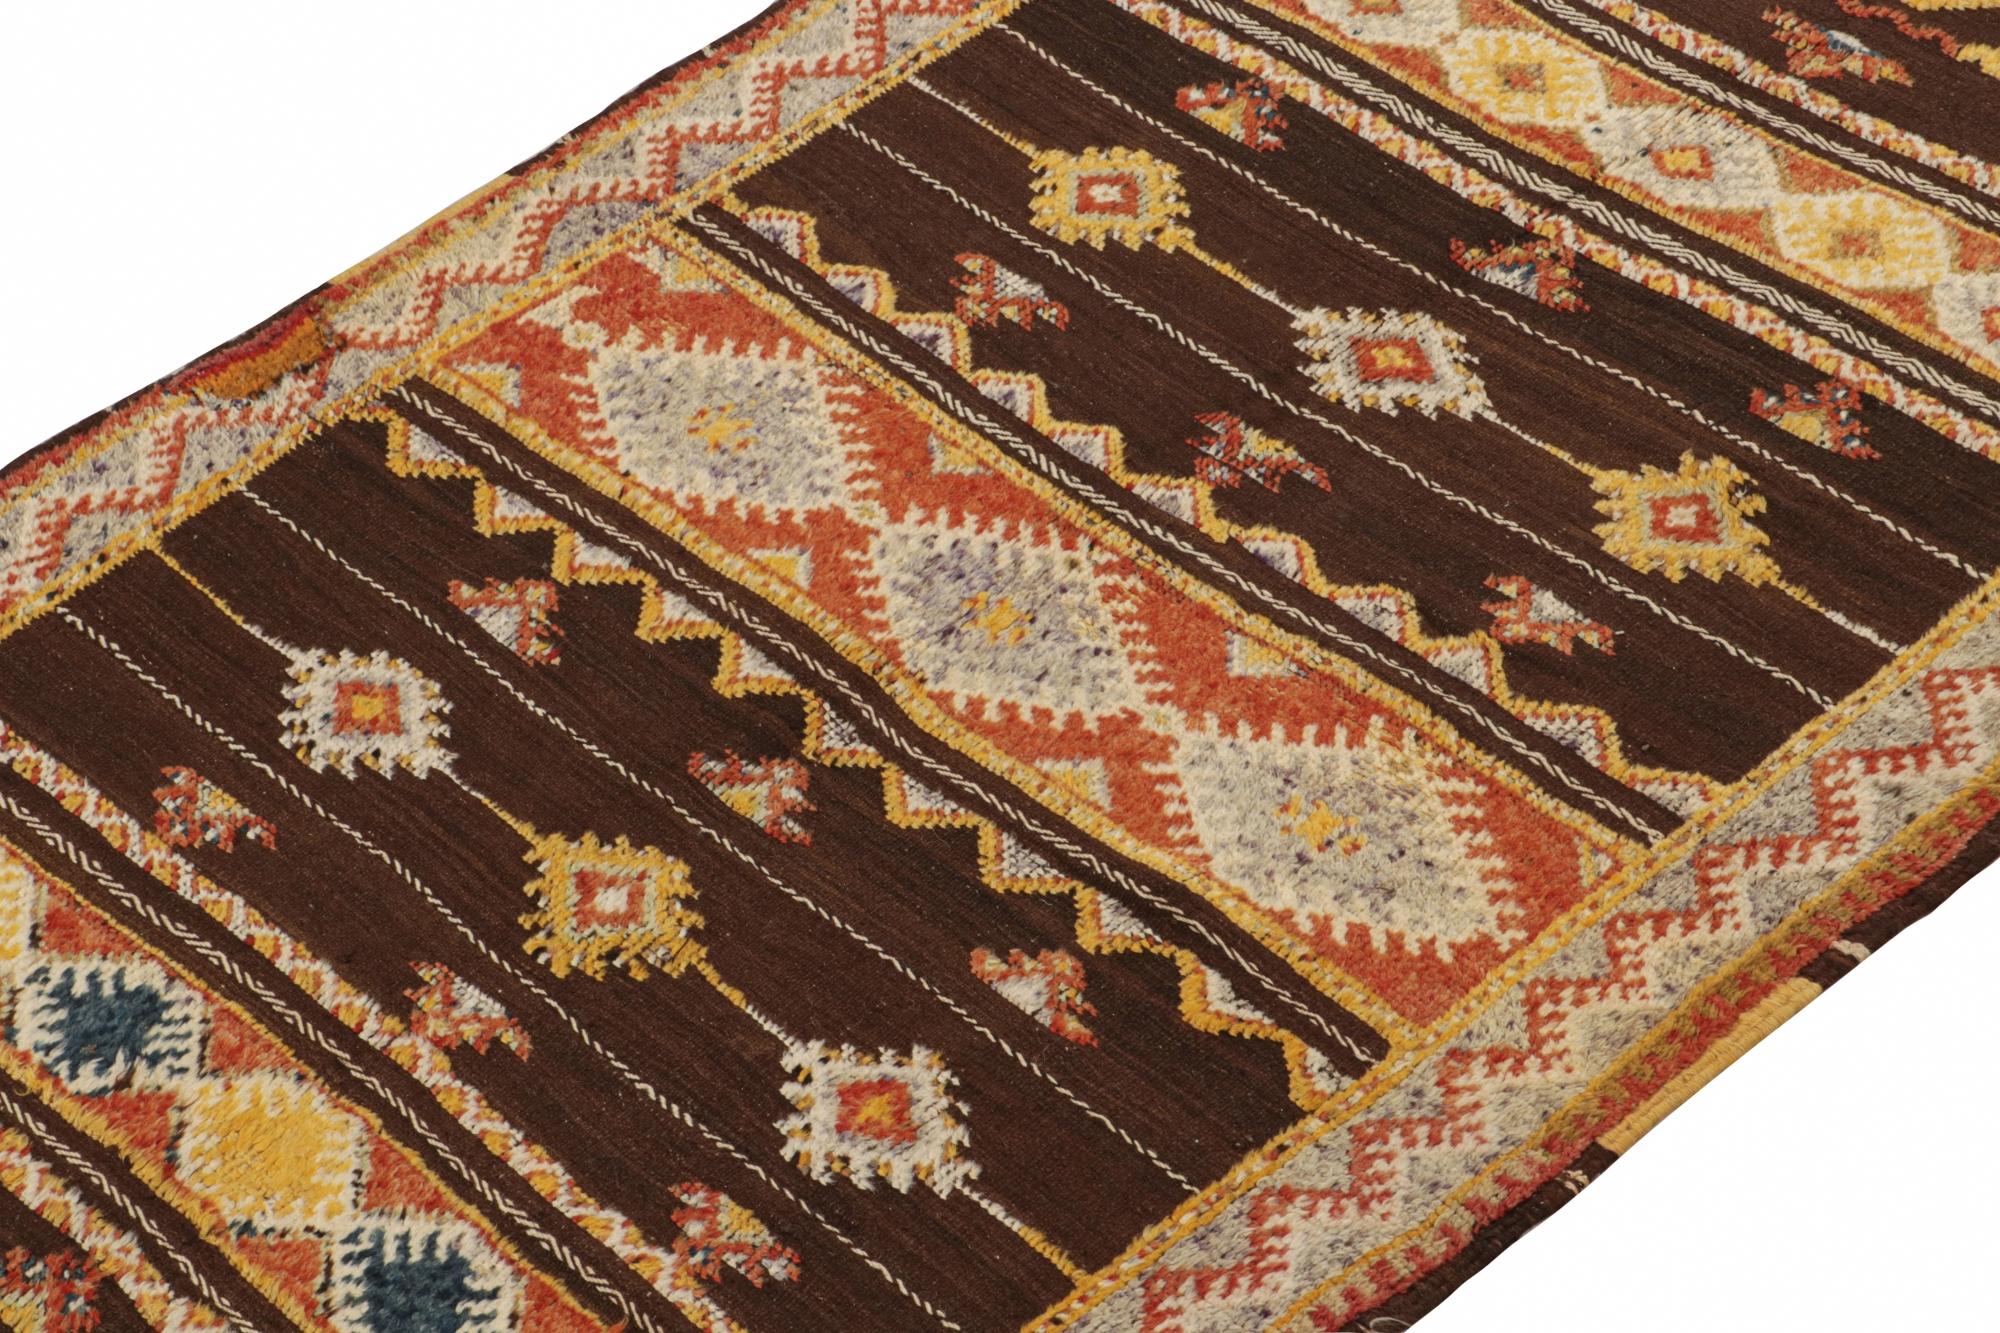 Handwoven in wool circa 1950-1960, this 4x8 vintage Moroccan Kilim and Berber rug is an exciting new unveiling from the Rug & Kilim collection.

On the Design:

This flatweave is believed to originate from the Azilal tribe. This piece enjoys a rare